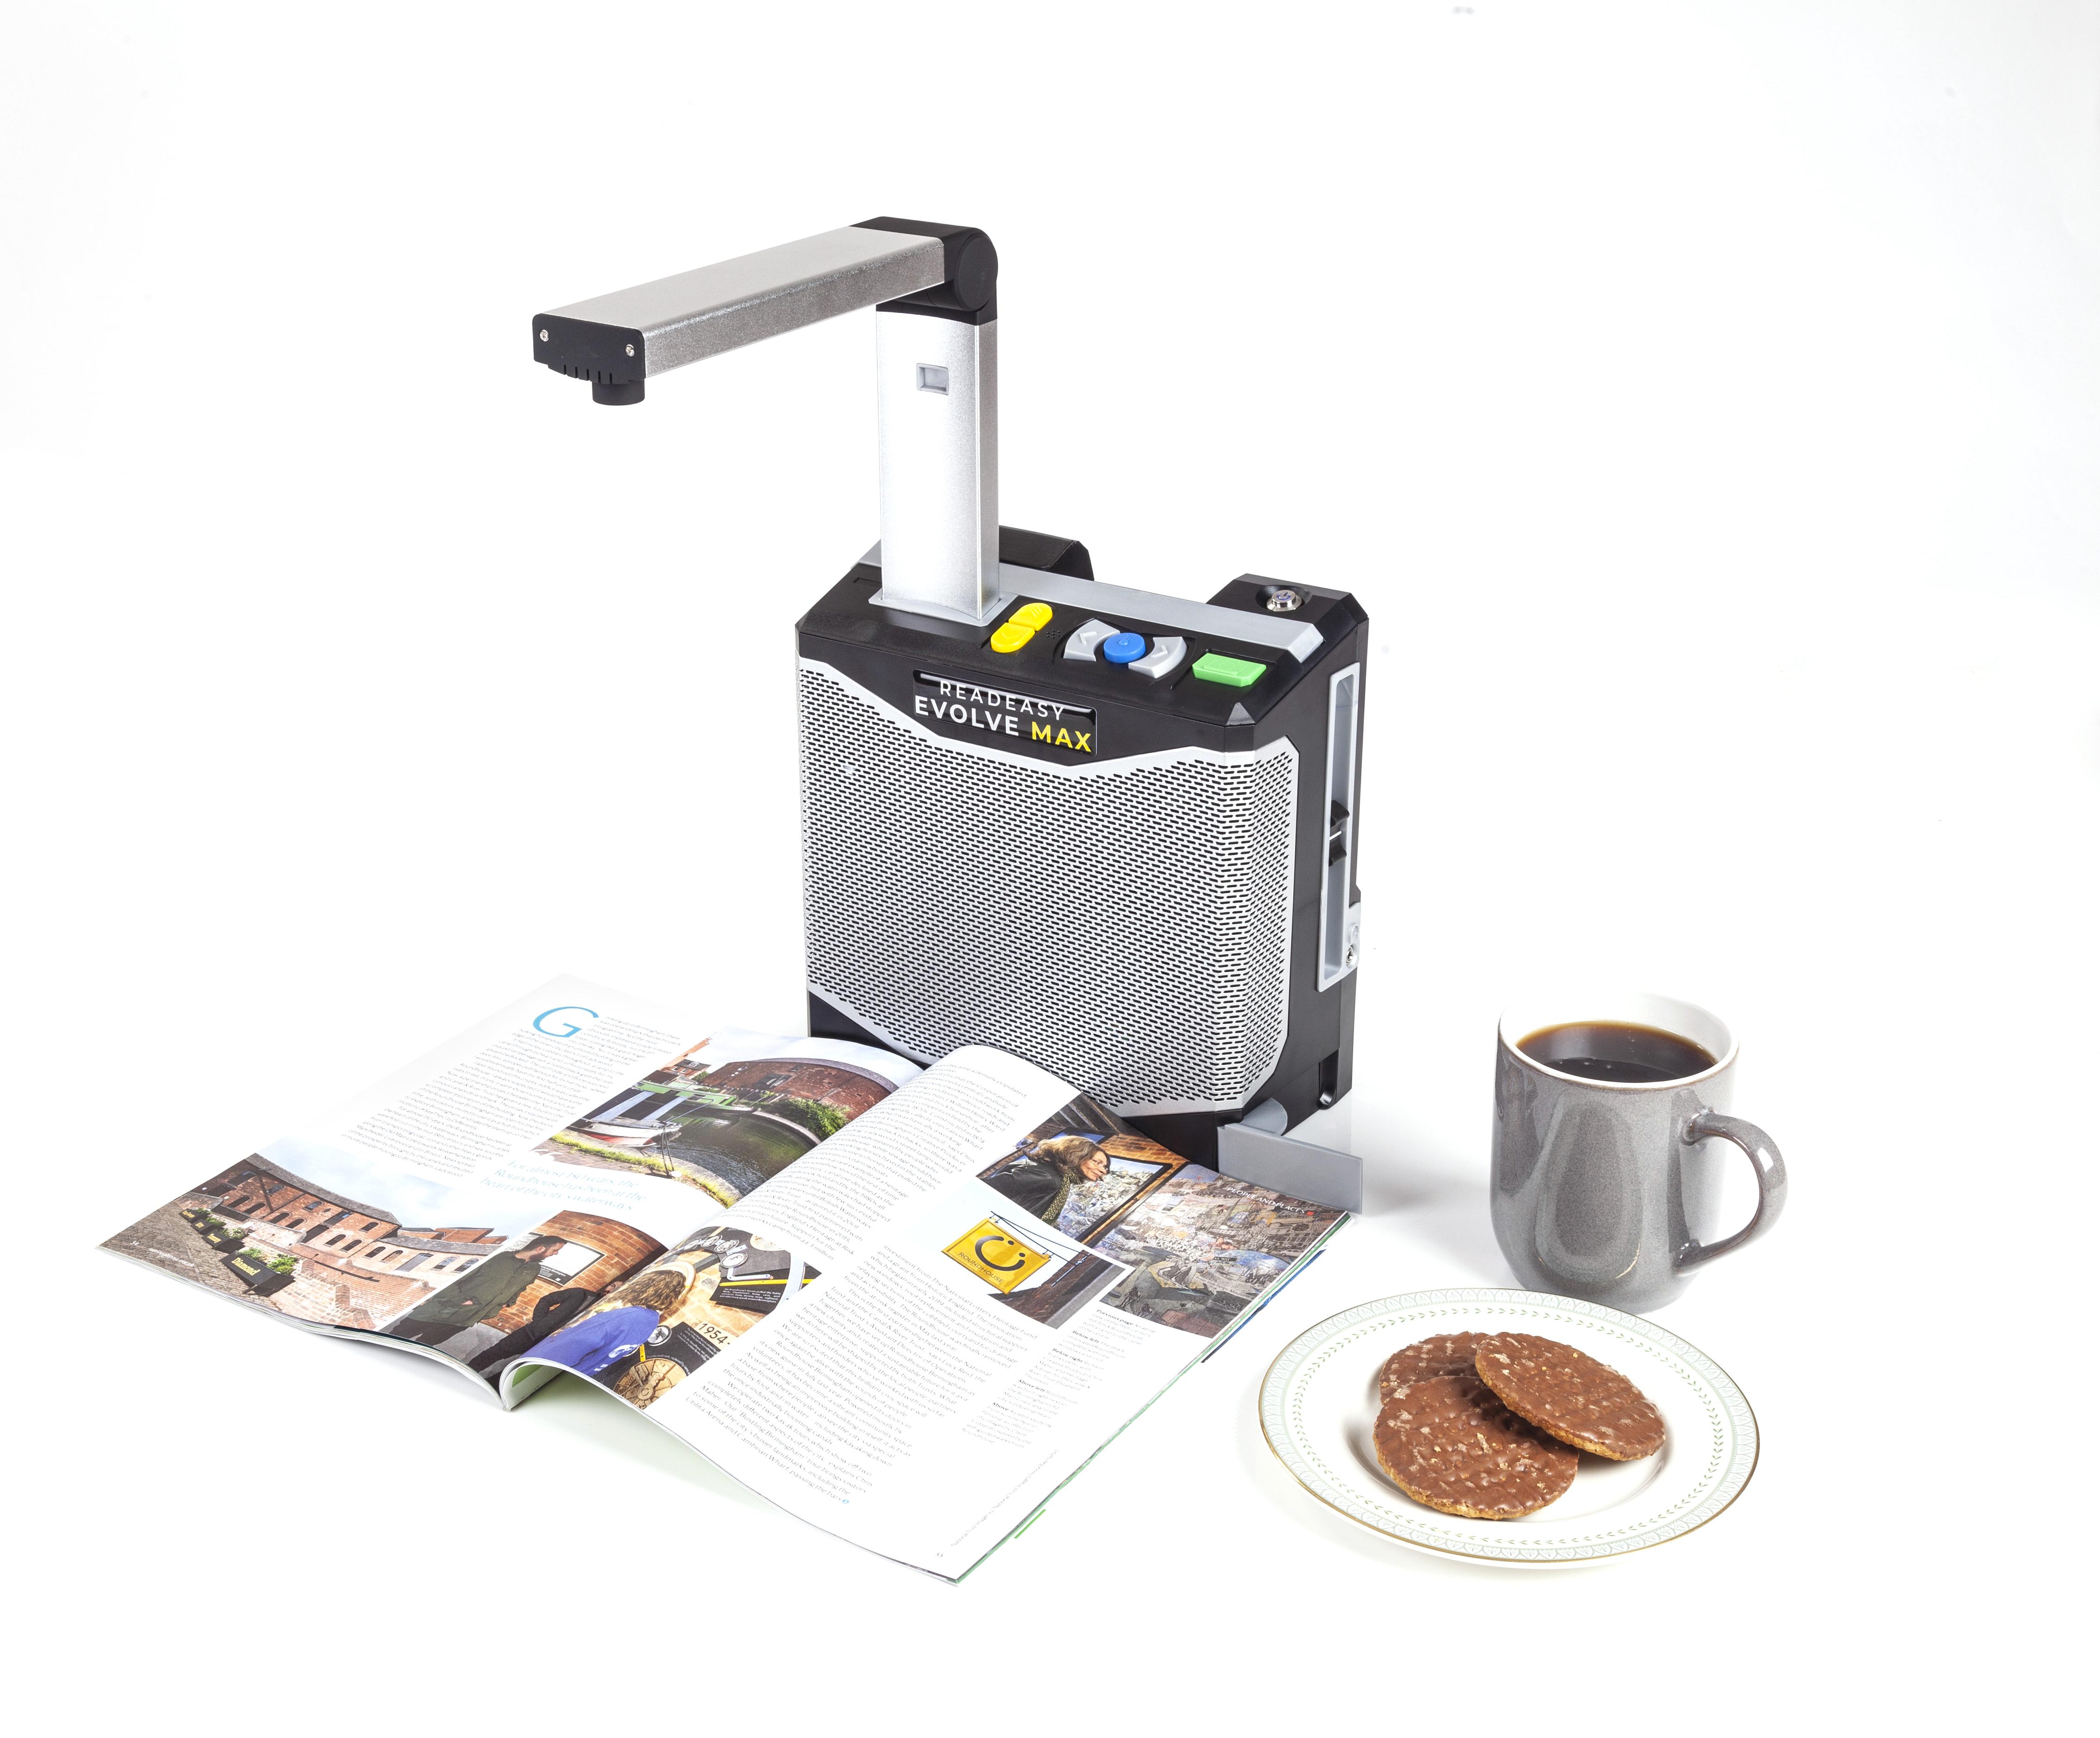 ReadEasy Evolve MAX capturing a magazine to the right of the readeasy evolve max is a grey mug of tea and a plate with 3 chocolate digestive biscuits